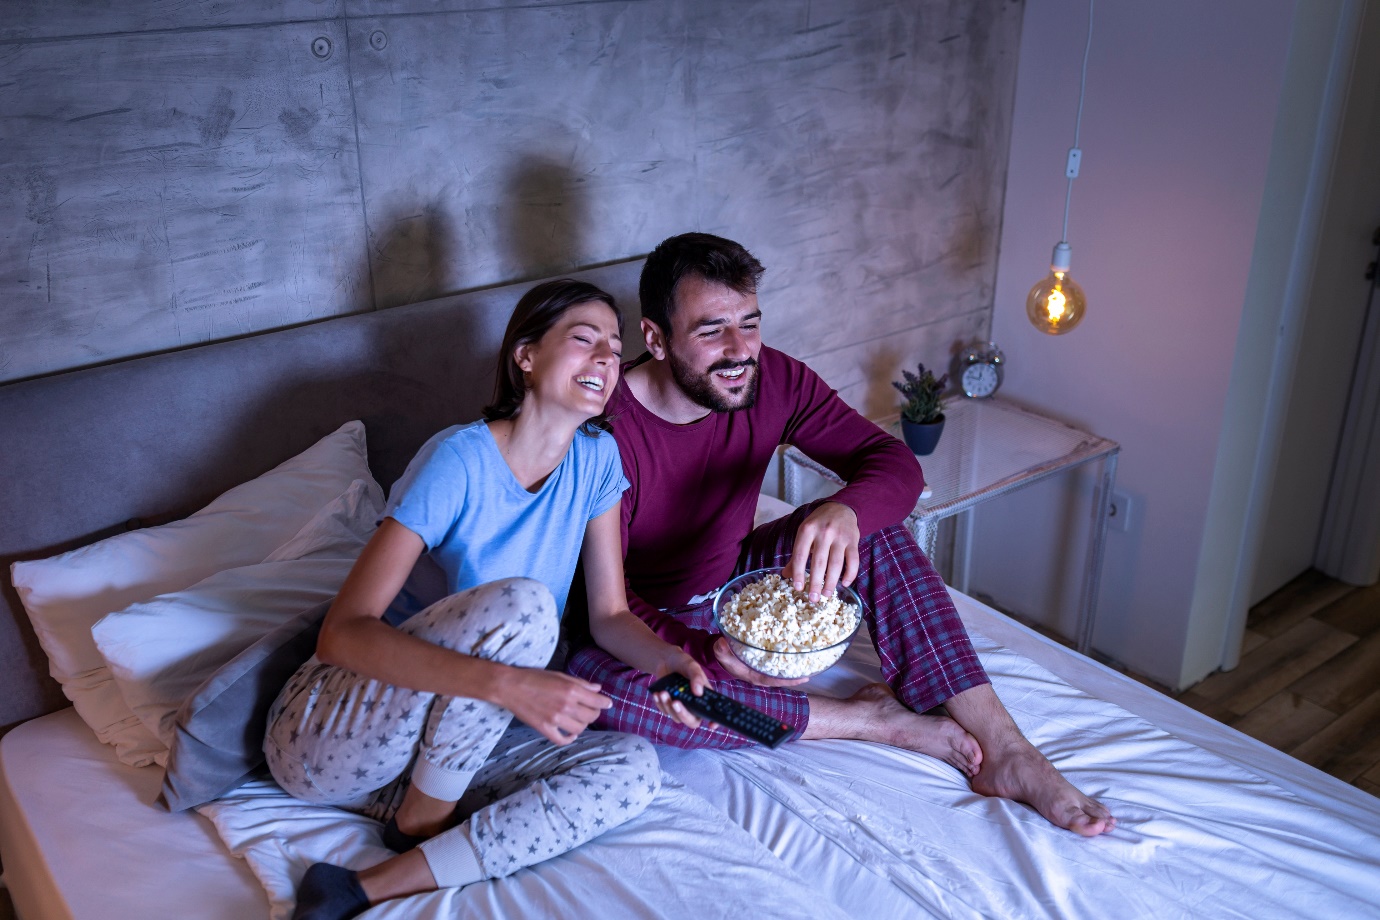 50% of Brits have a TV in their bedroom: Sleep expert comments on if you should watch TV to go to sleep